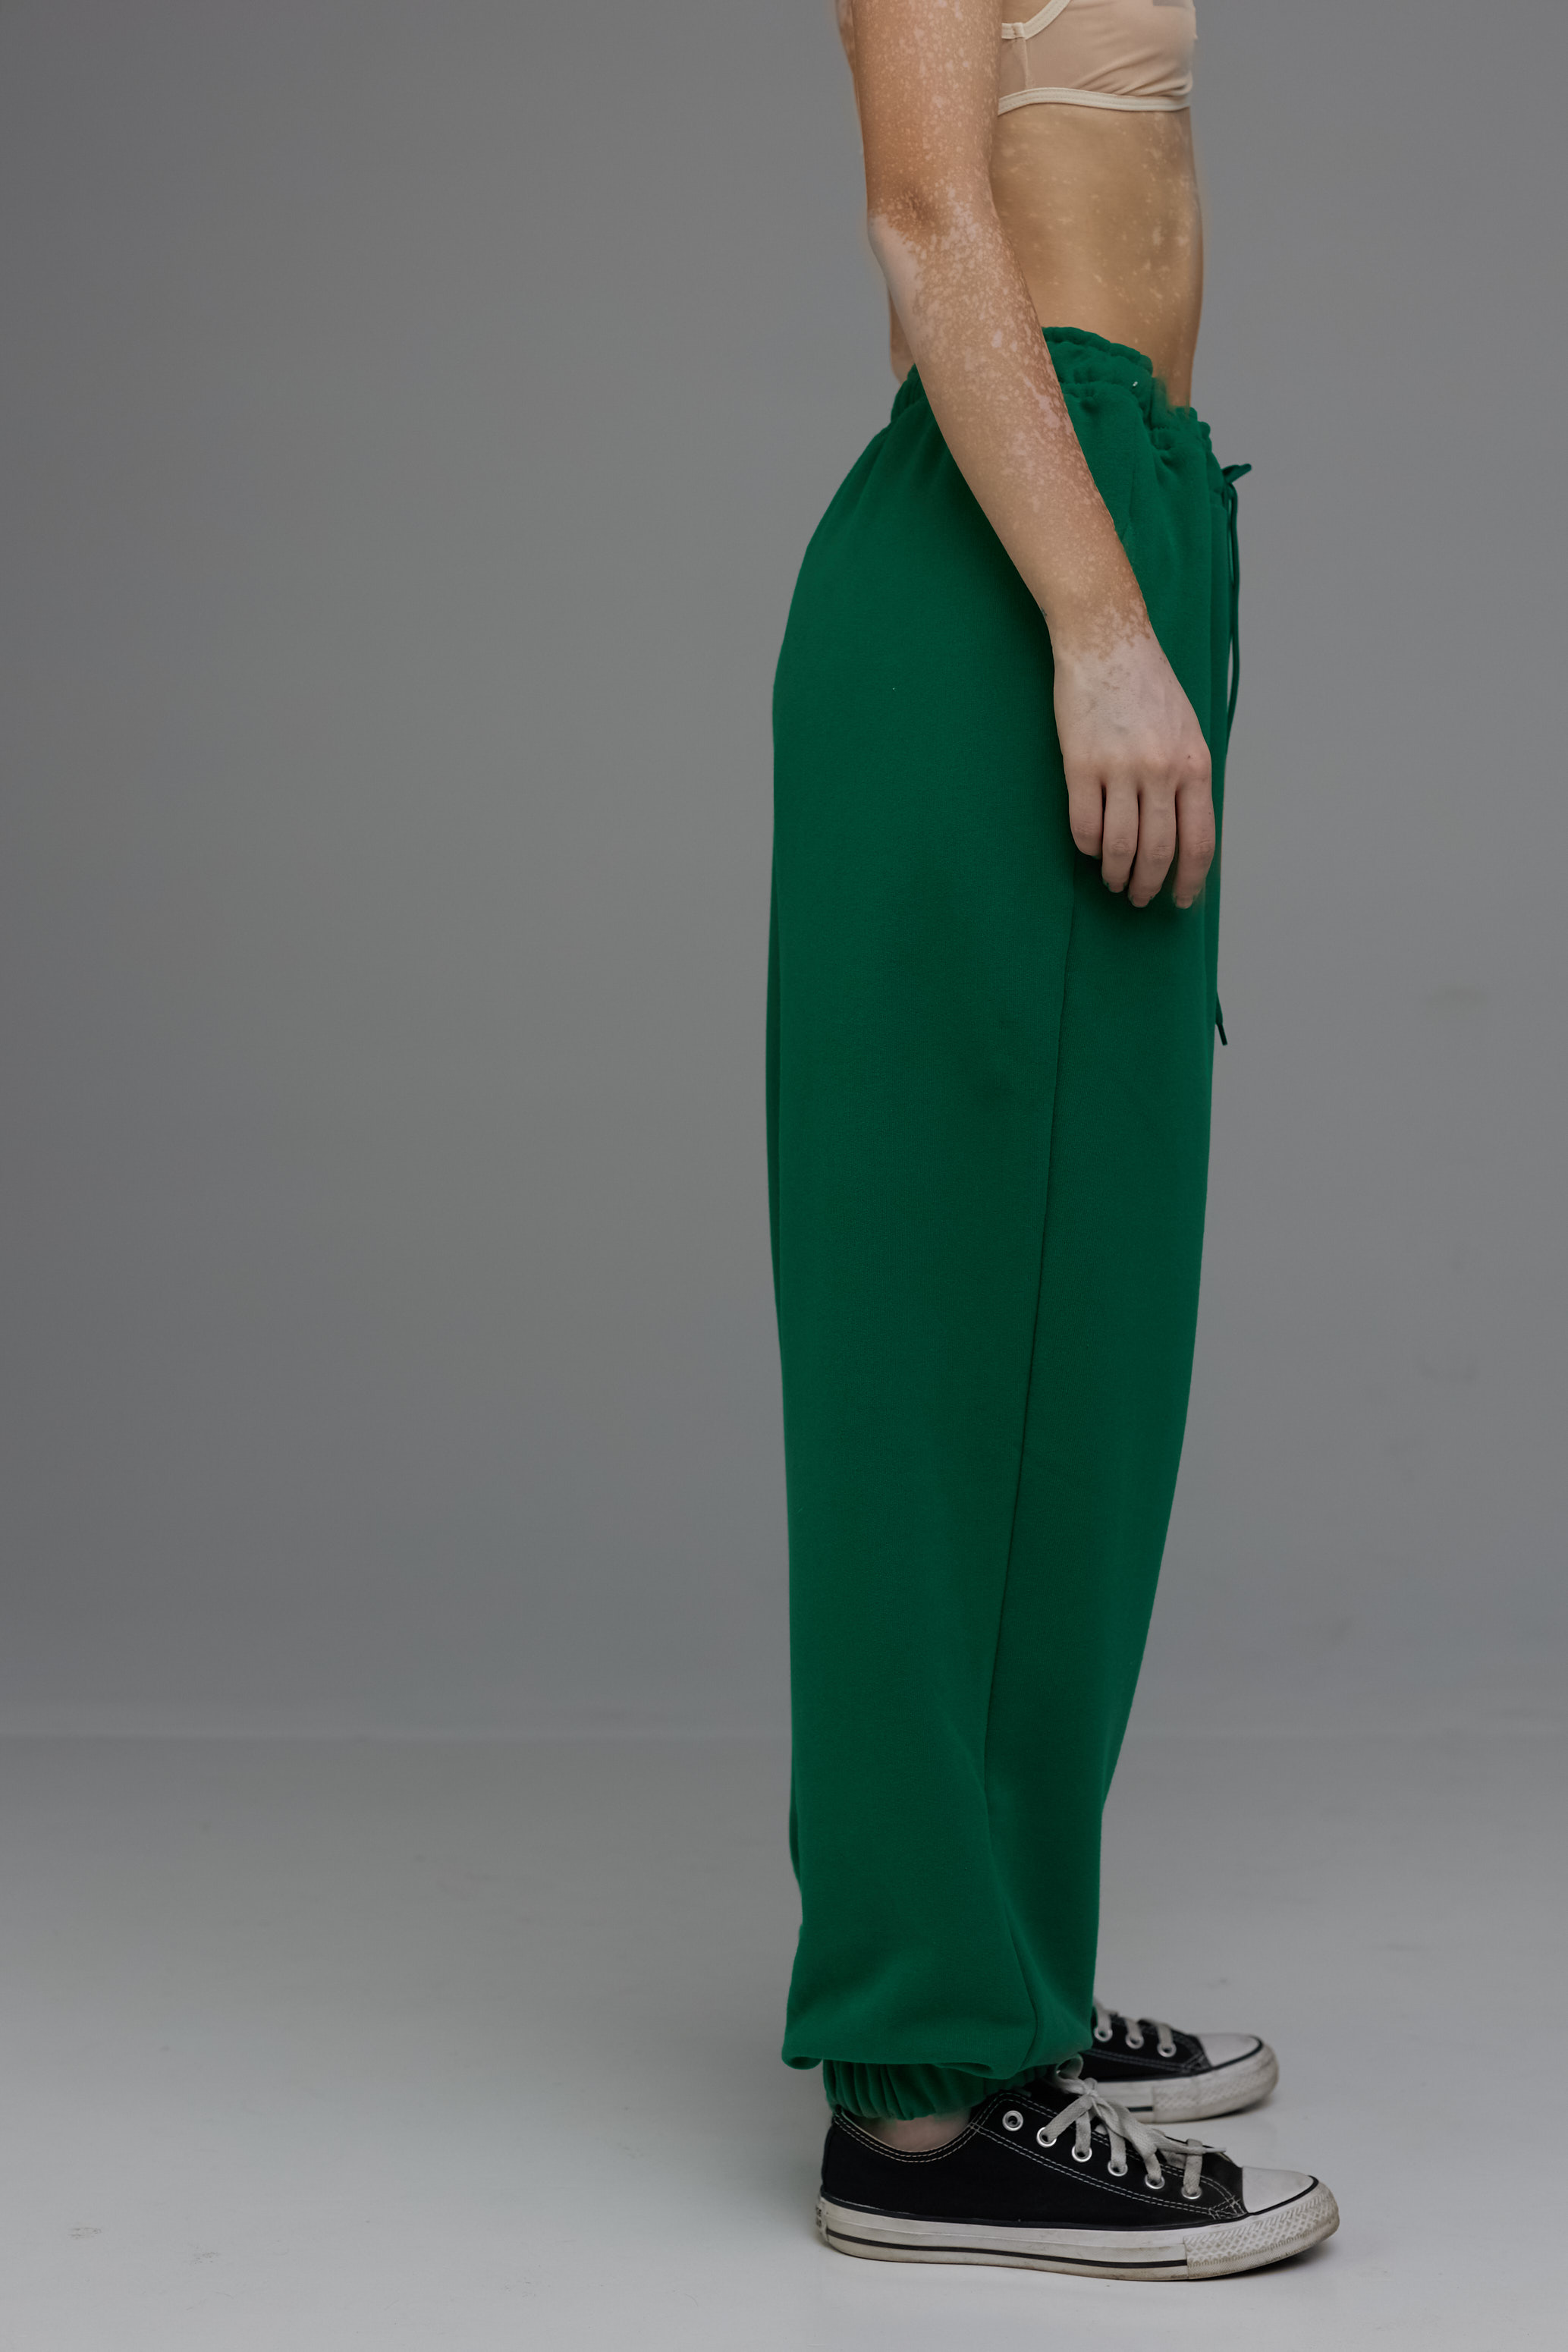 groove pants in watermelon color